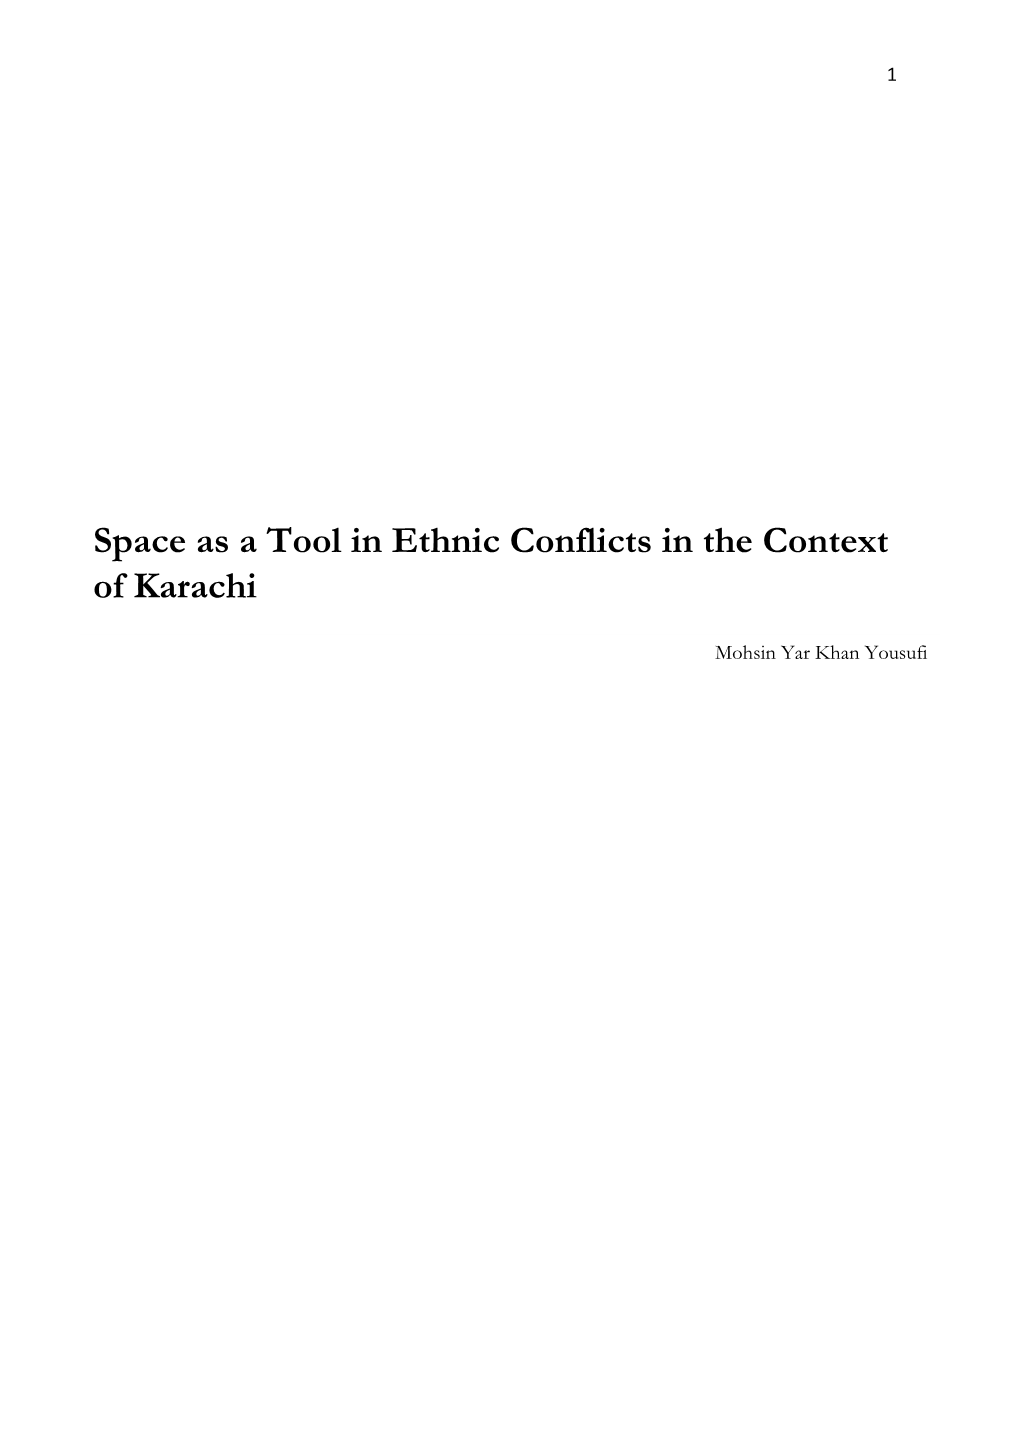 Space As a Tool in Ethnic Conflicts in the Context of Karachi